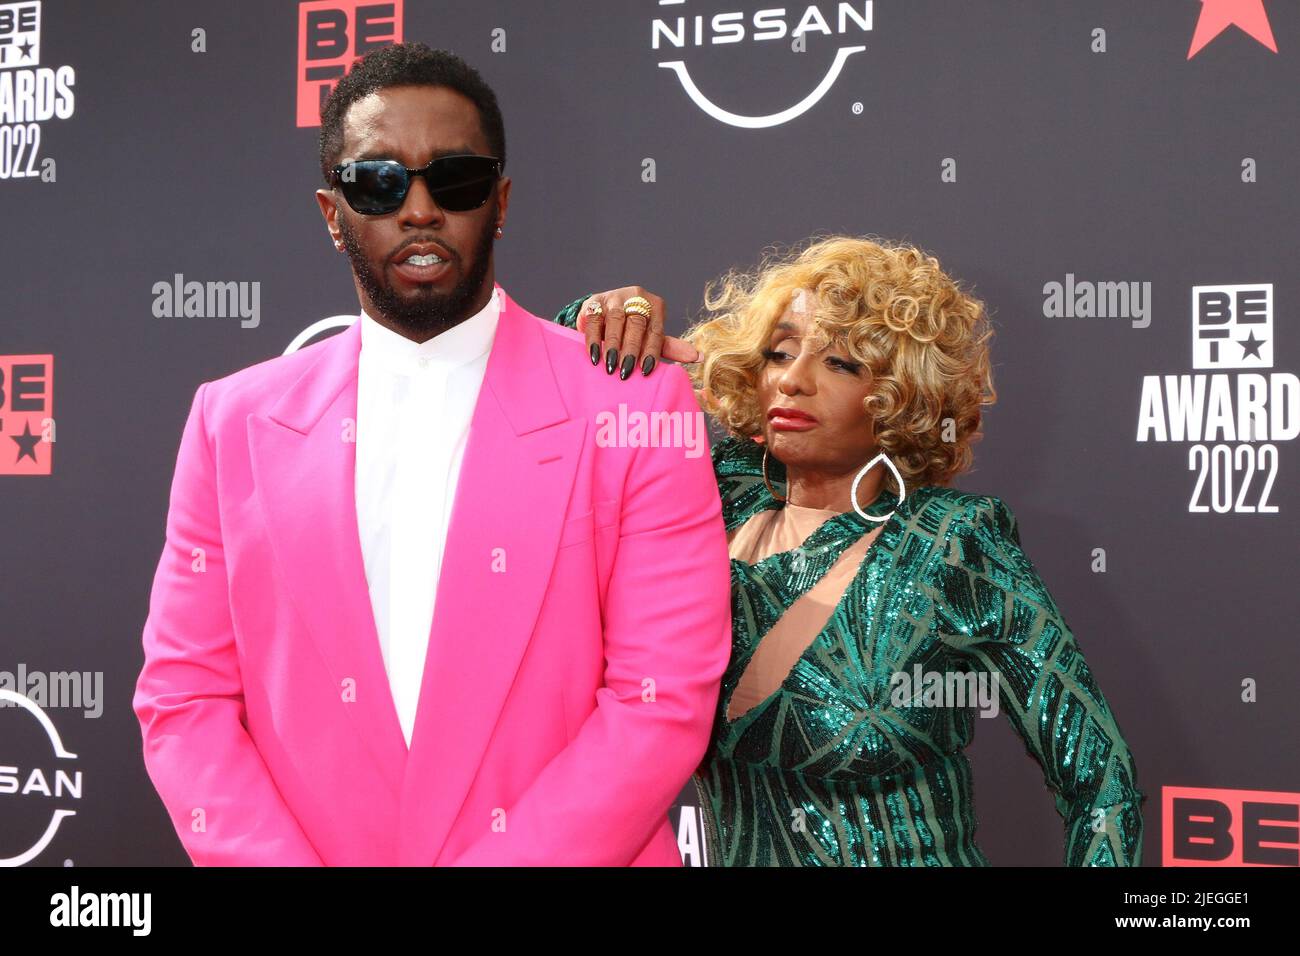 LOS ANGELES - JUN 26:  Sean Combs, mother Janice Combs at the 2022 BET Awards at Microsoft Theater on June 26, 2022 in Los Angeles, CA Stock Photo